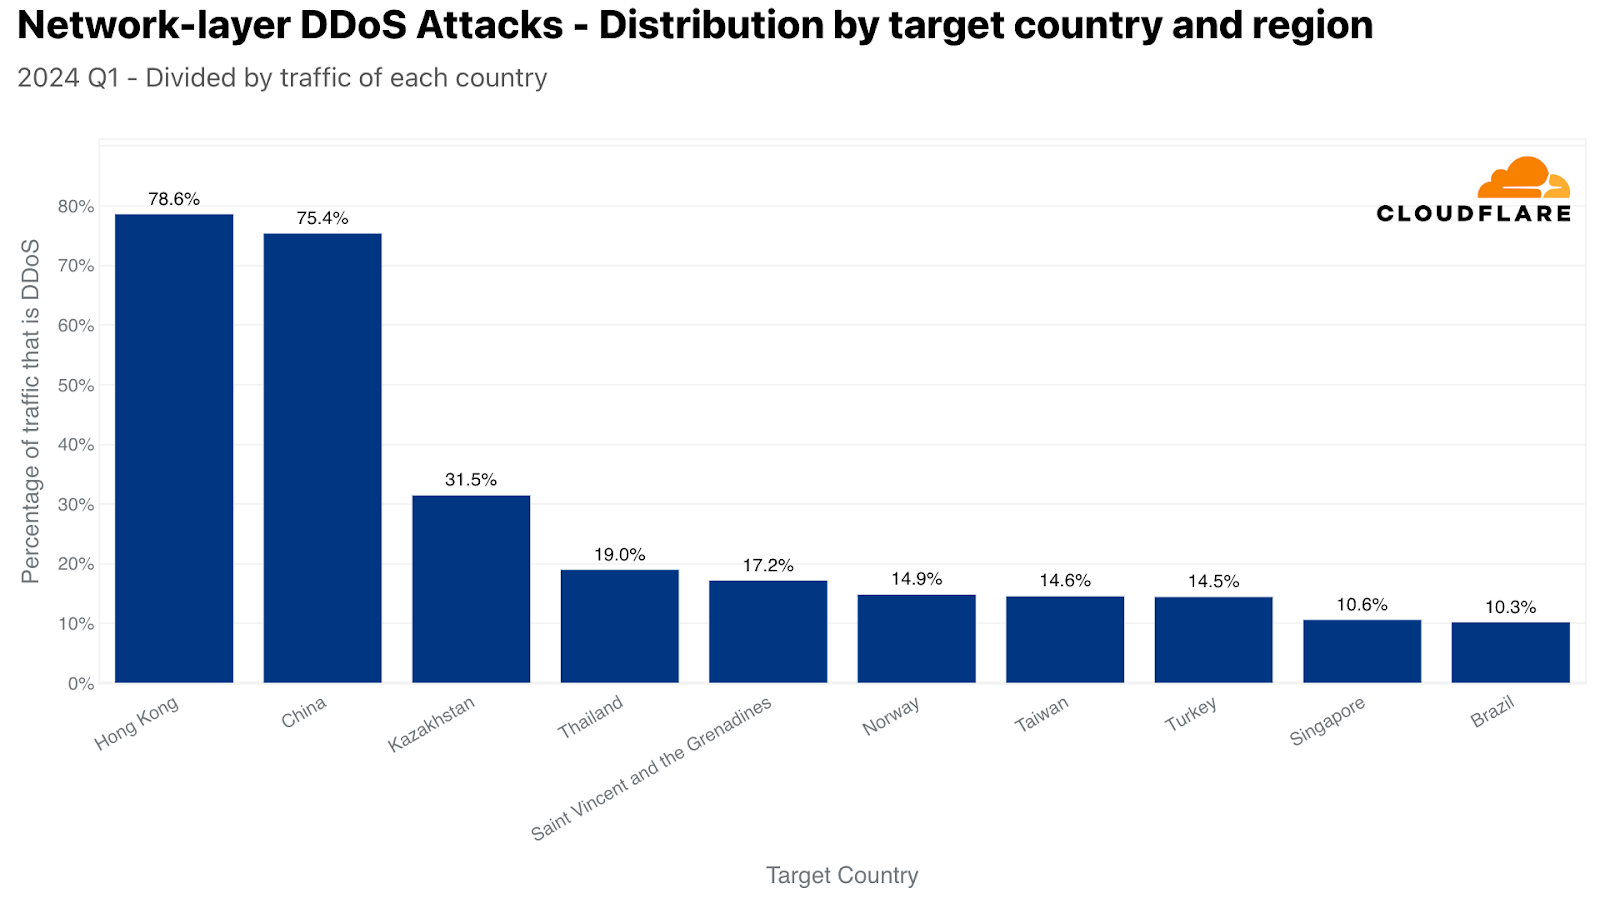 Top attacked countries and regions by L3/4 DDoS attacks (normalized)